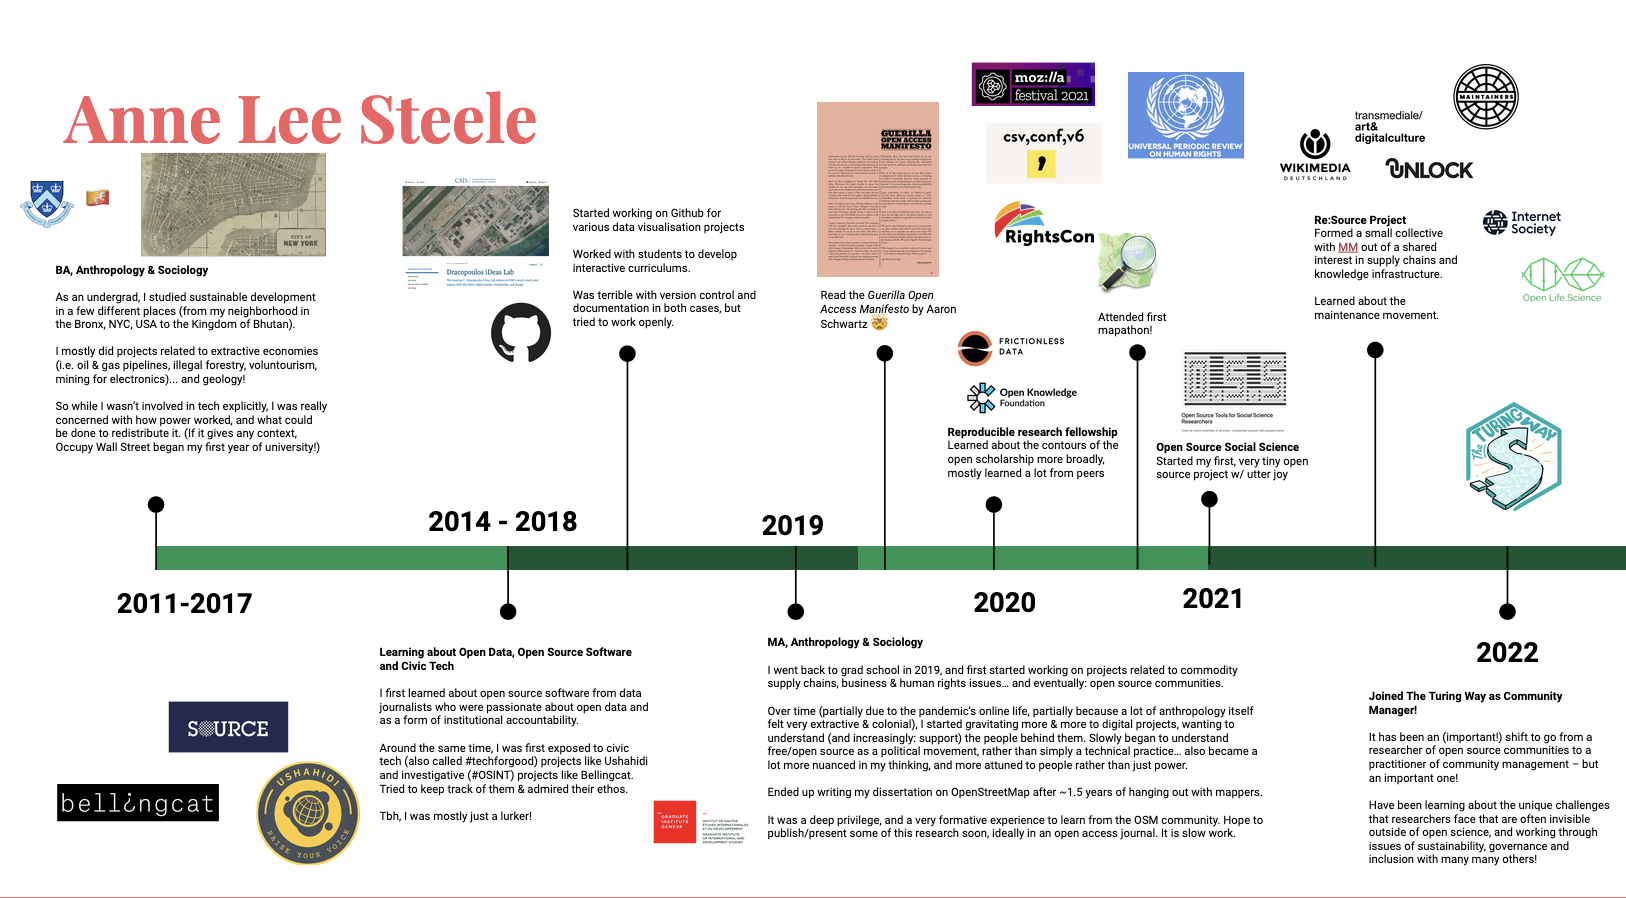 Alt:Screenshot of slide with history of my "open" ecosystem journey - link available below